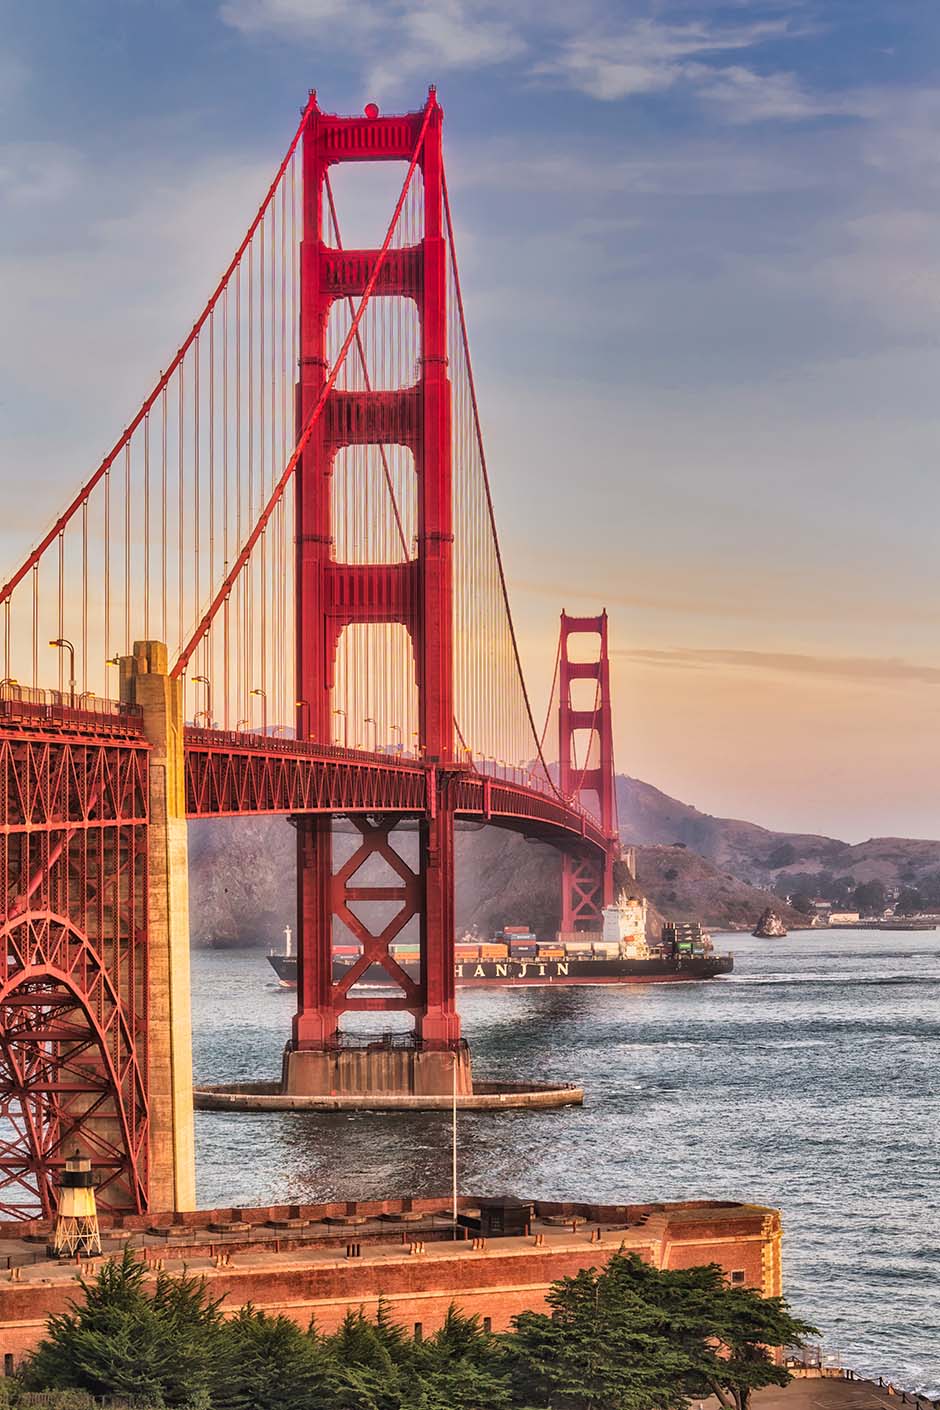 The Golden Gate Bridge spans the Golden Gate Strait between San Francisco and the Pacific Ocean. This suspension bridge is 1.7 miles long and 90 feet wide. The two towers reach 746 feet above the water.